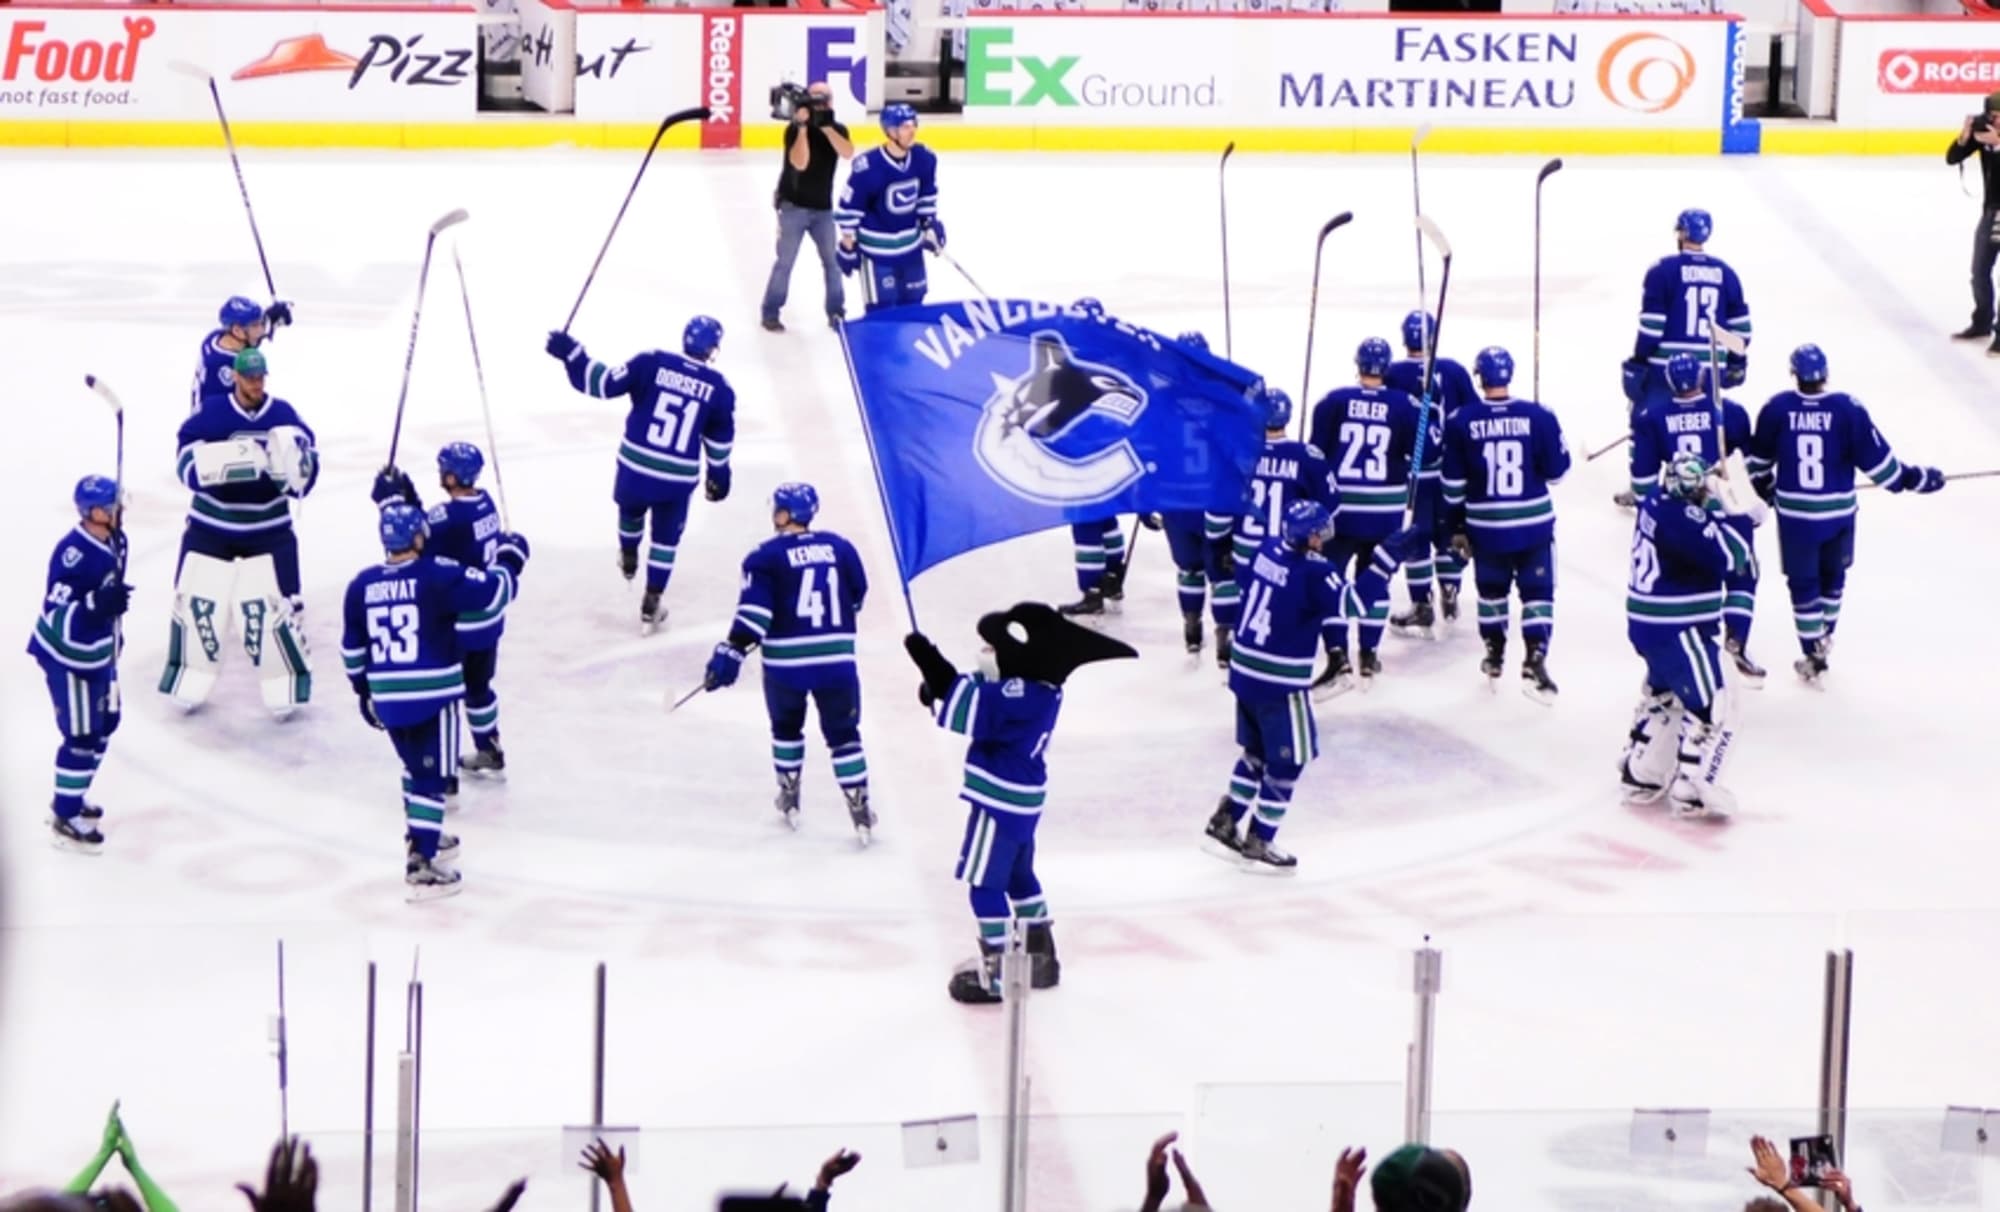 How the skate uniforms became a regular Canucks' feature night